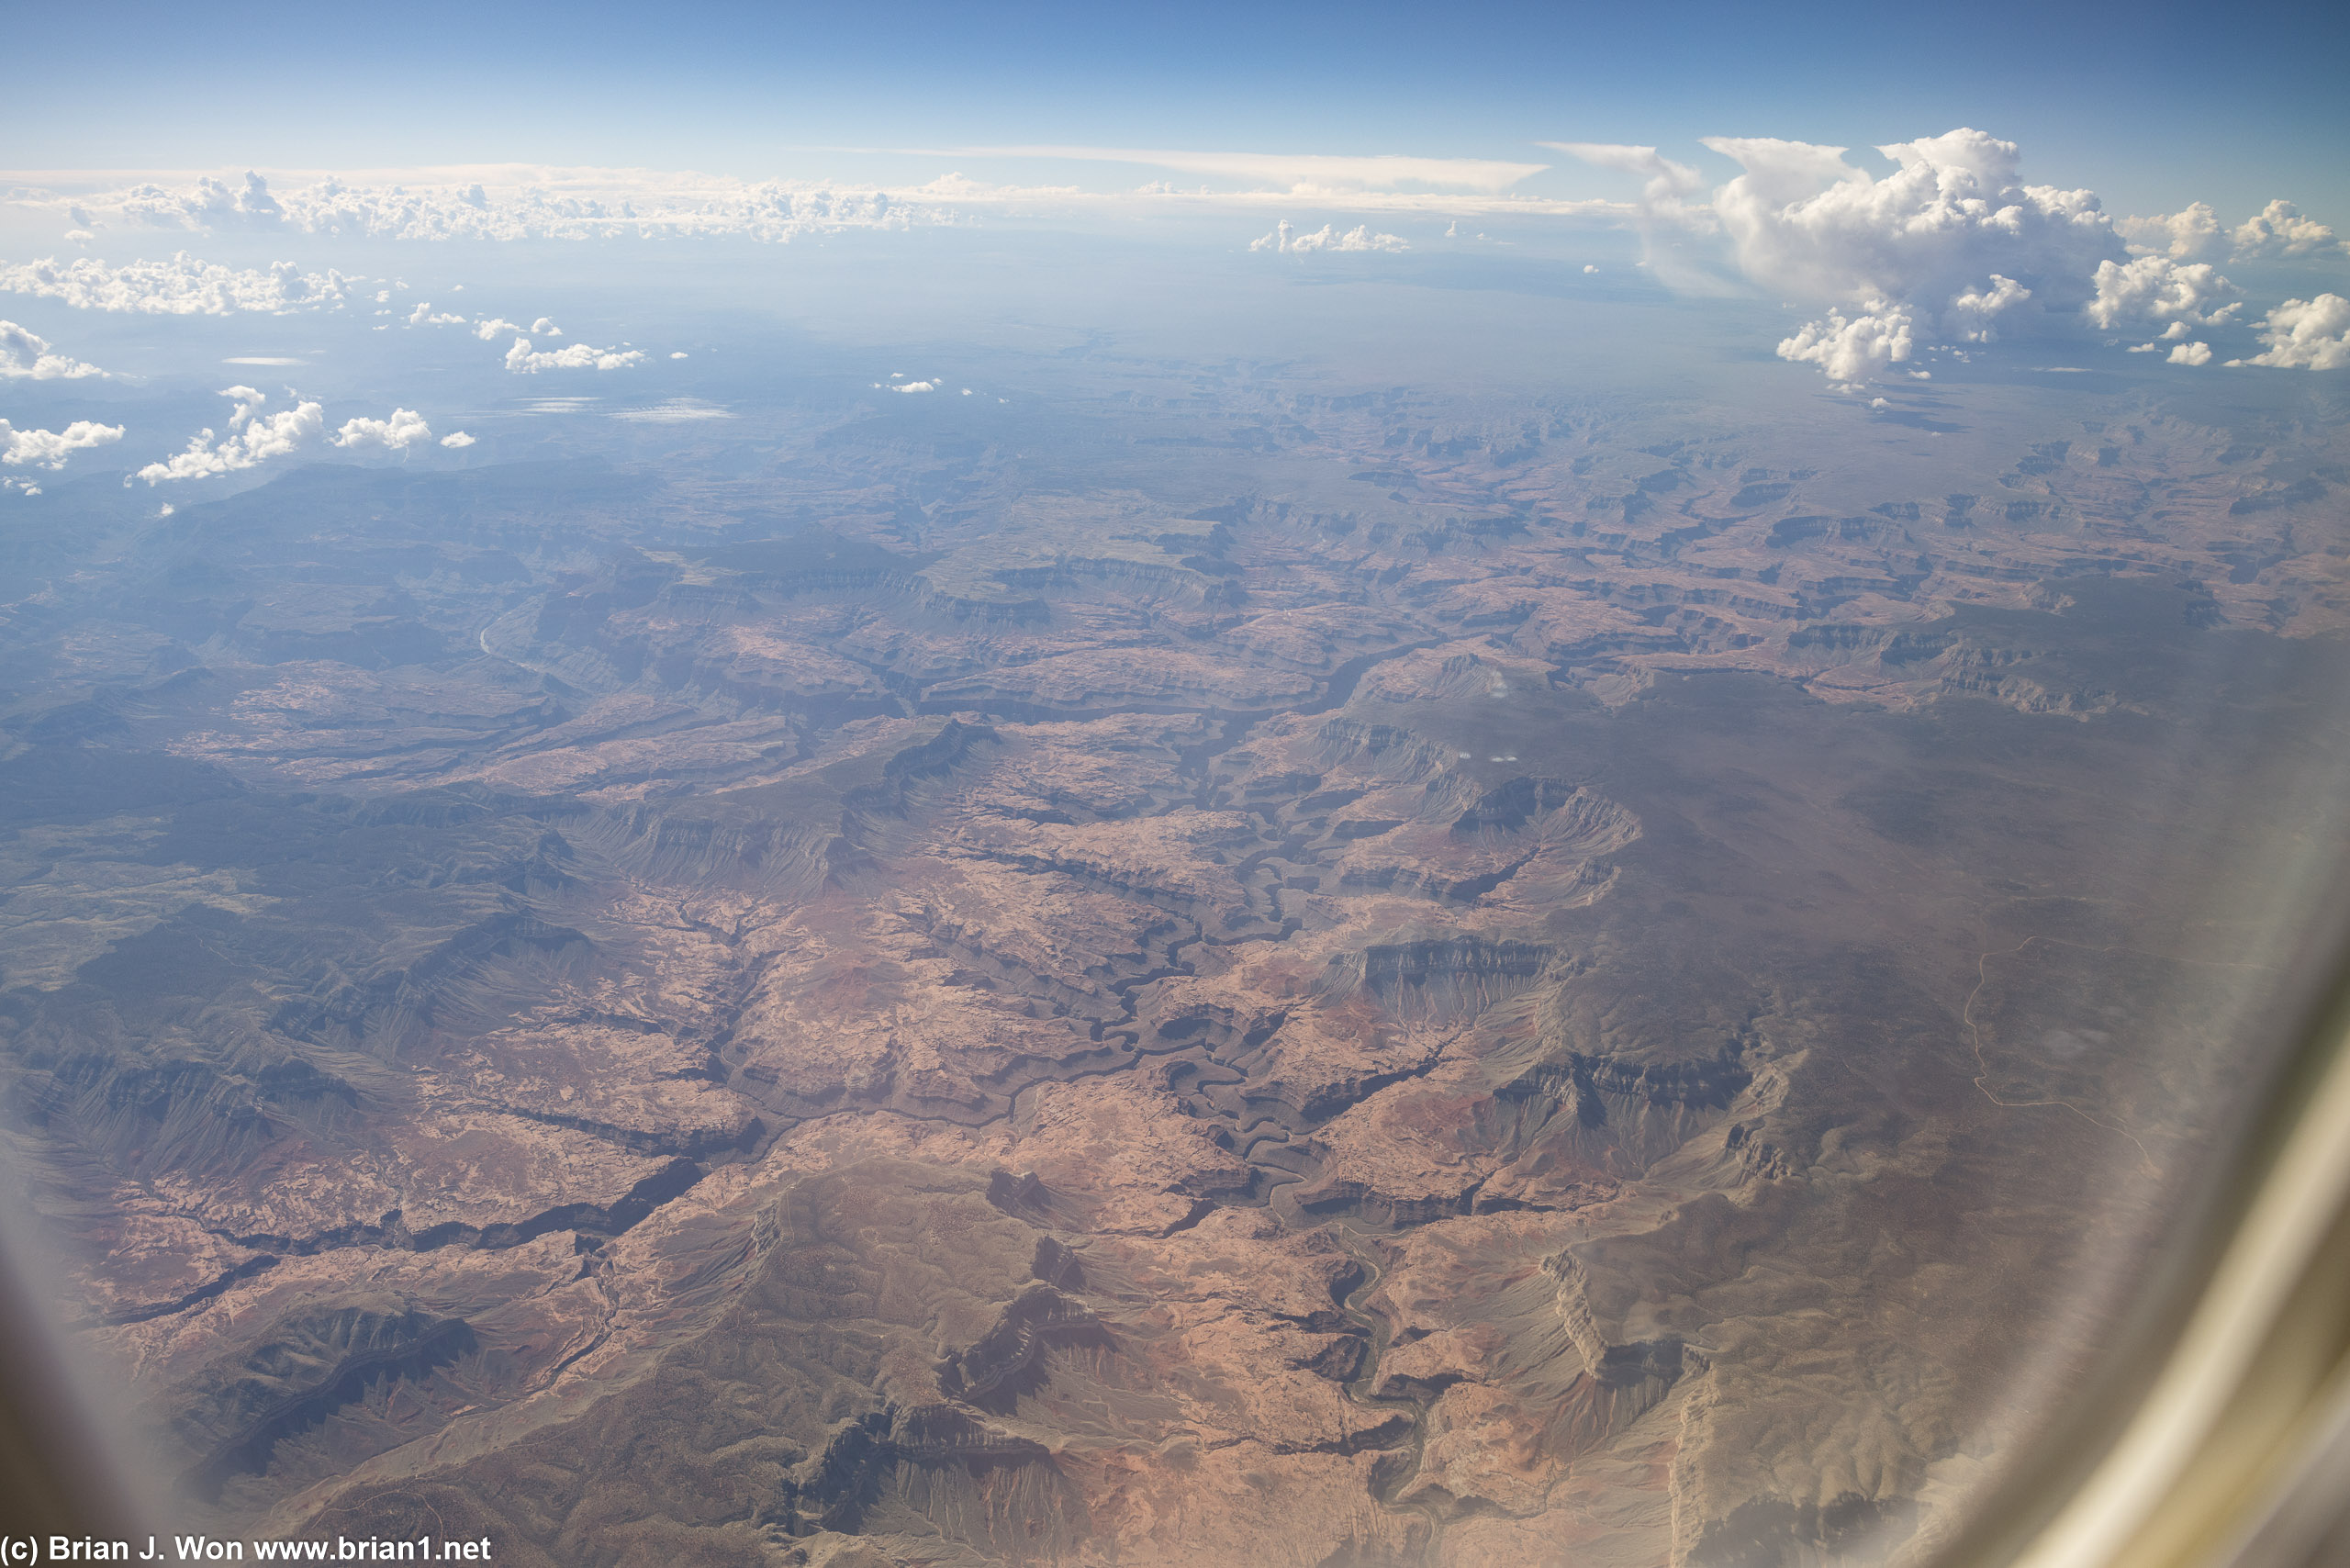 Looking south towards the Grand Canyon.